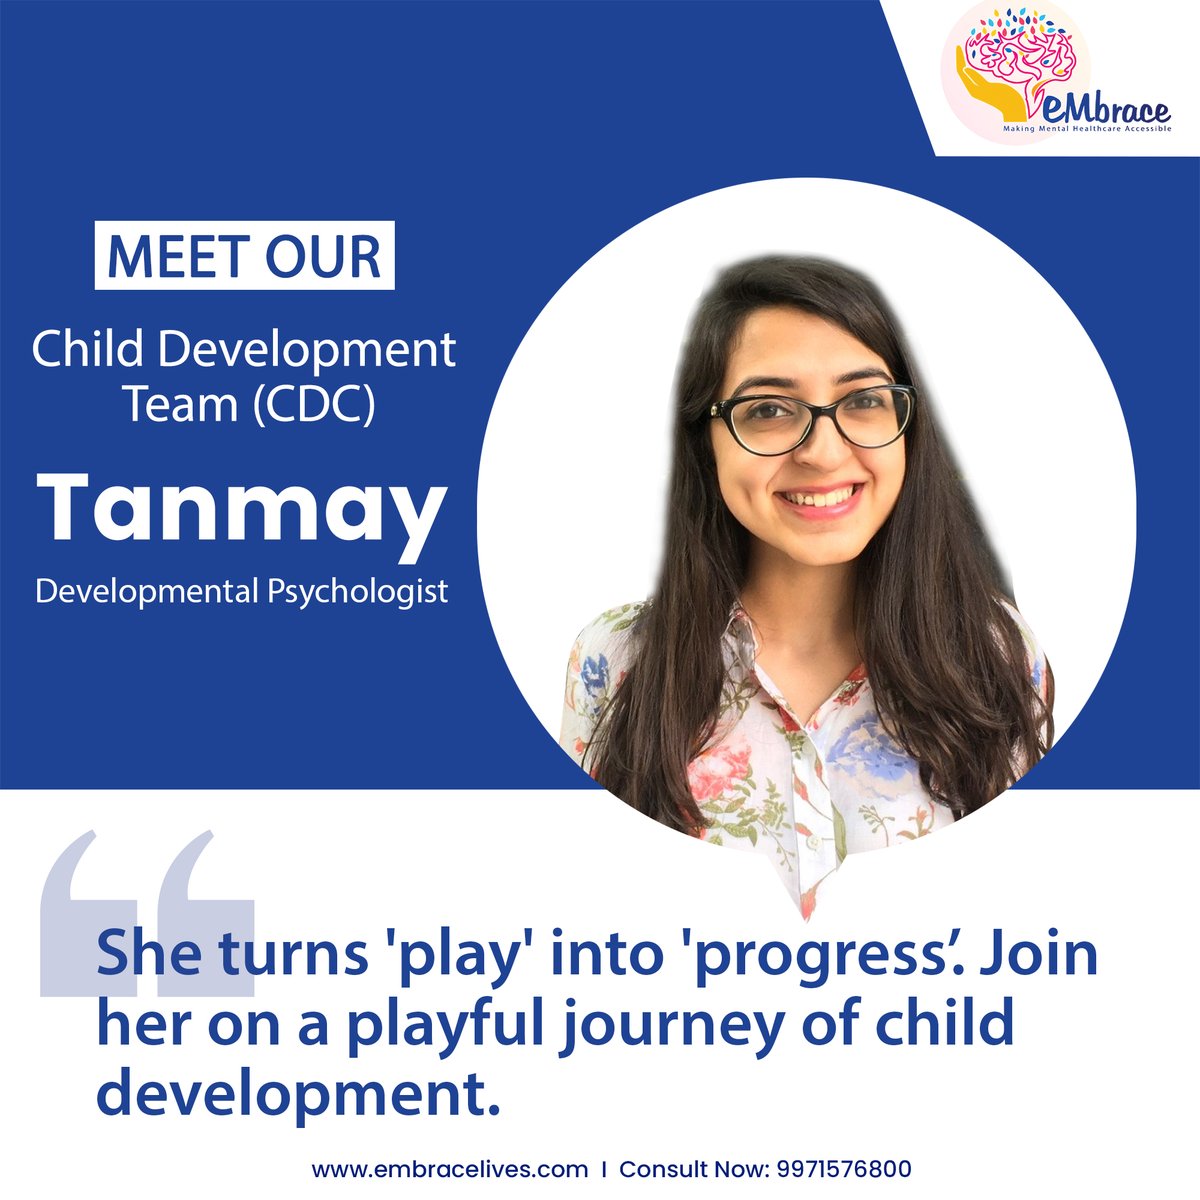 Meet Tanmay, our Developmental Psychologist extraordinaire! 🧠🌱 She's an integral part of our child development team, helping young minds flourish one step at a time. 💪

To book sessions with Tanmay, call us at 9971576800

#TeamSpotlight #childtherapy
#childrensmentalhealth